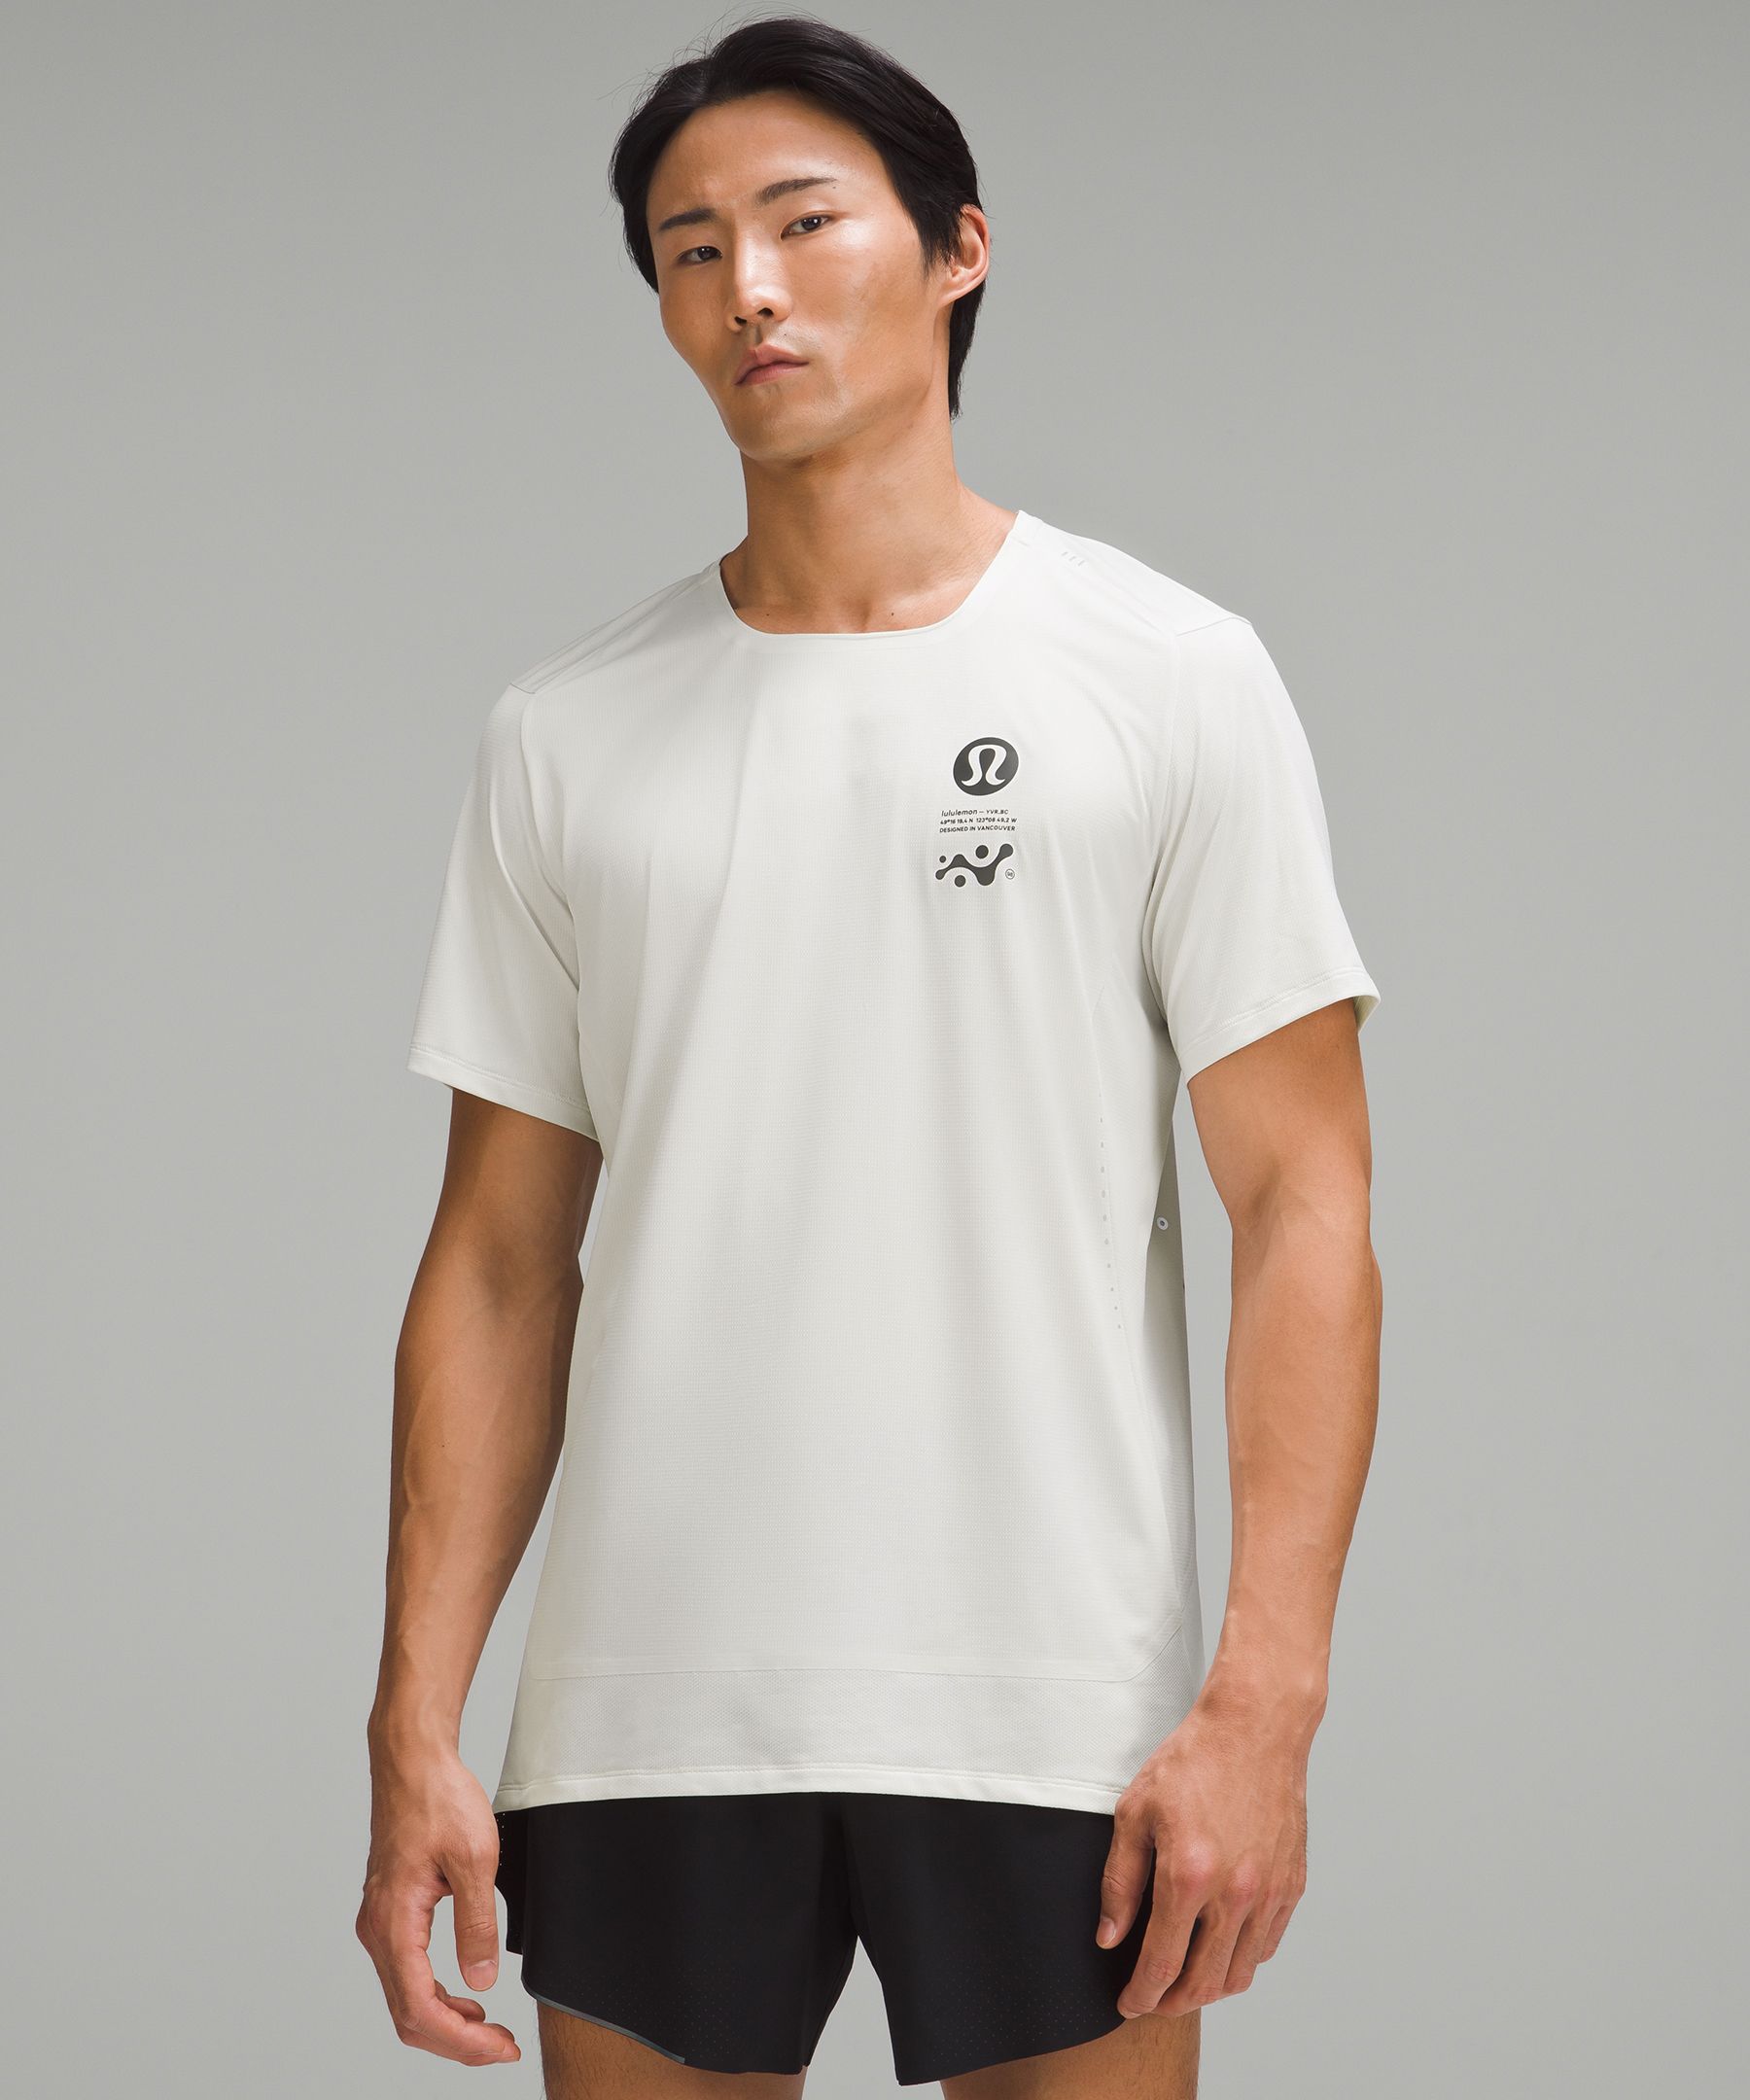 free size means one size' Men's T-Shirt